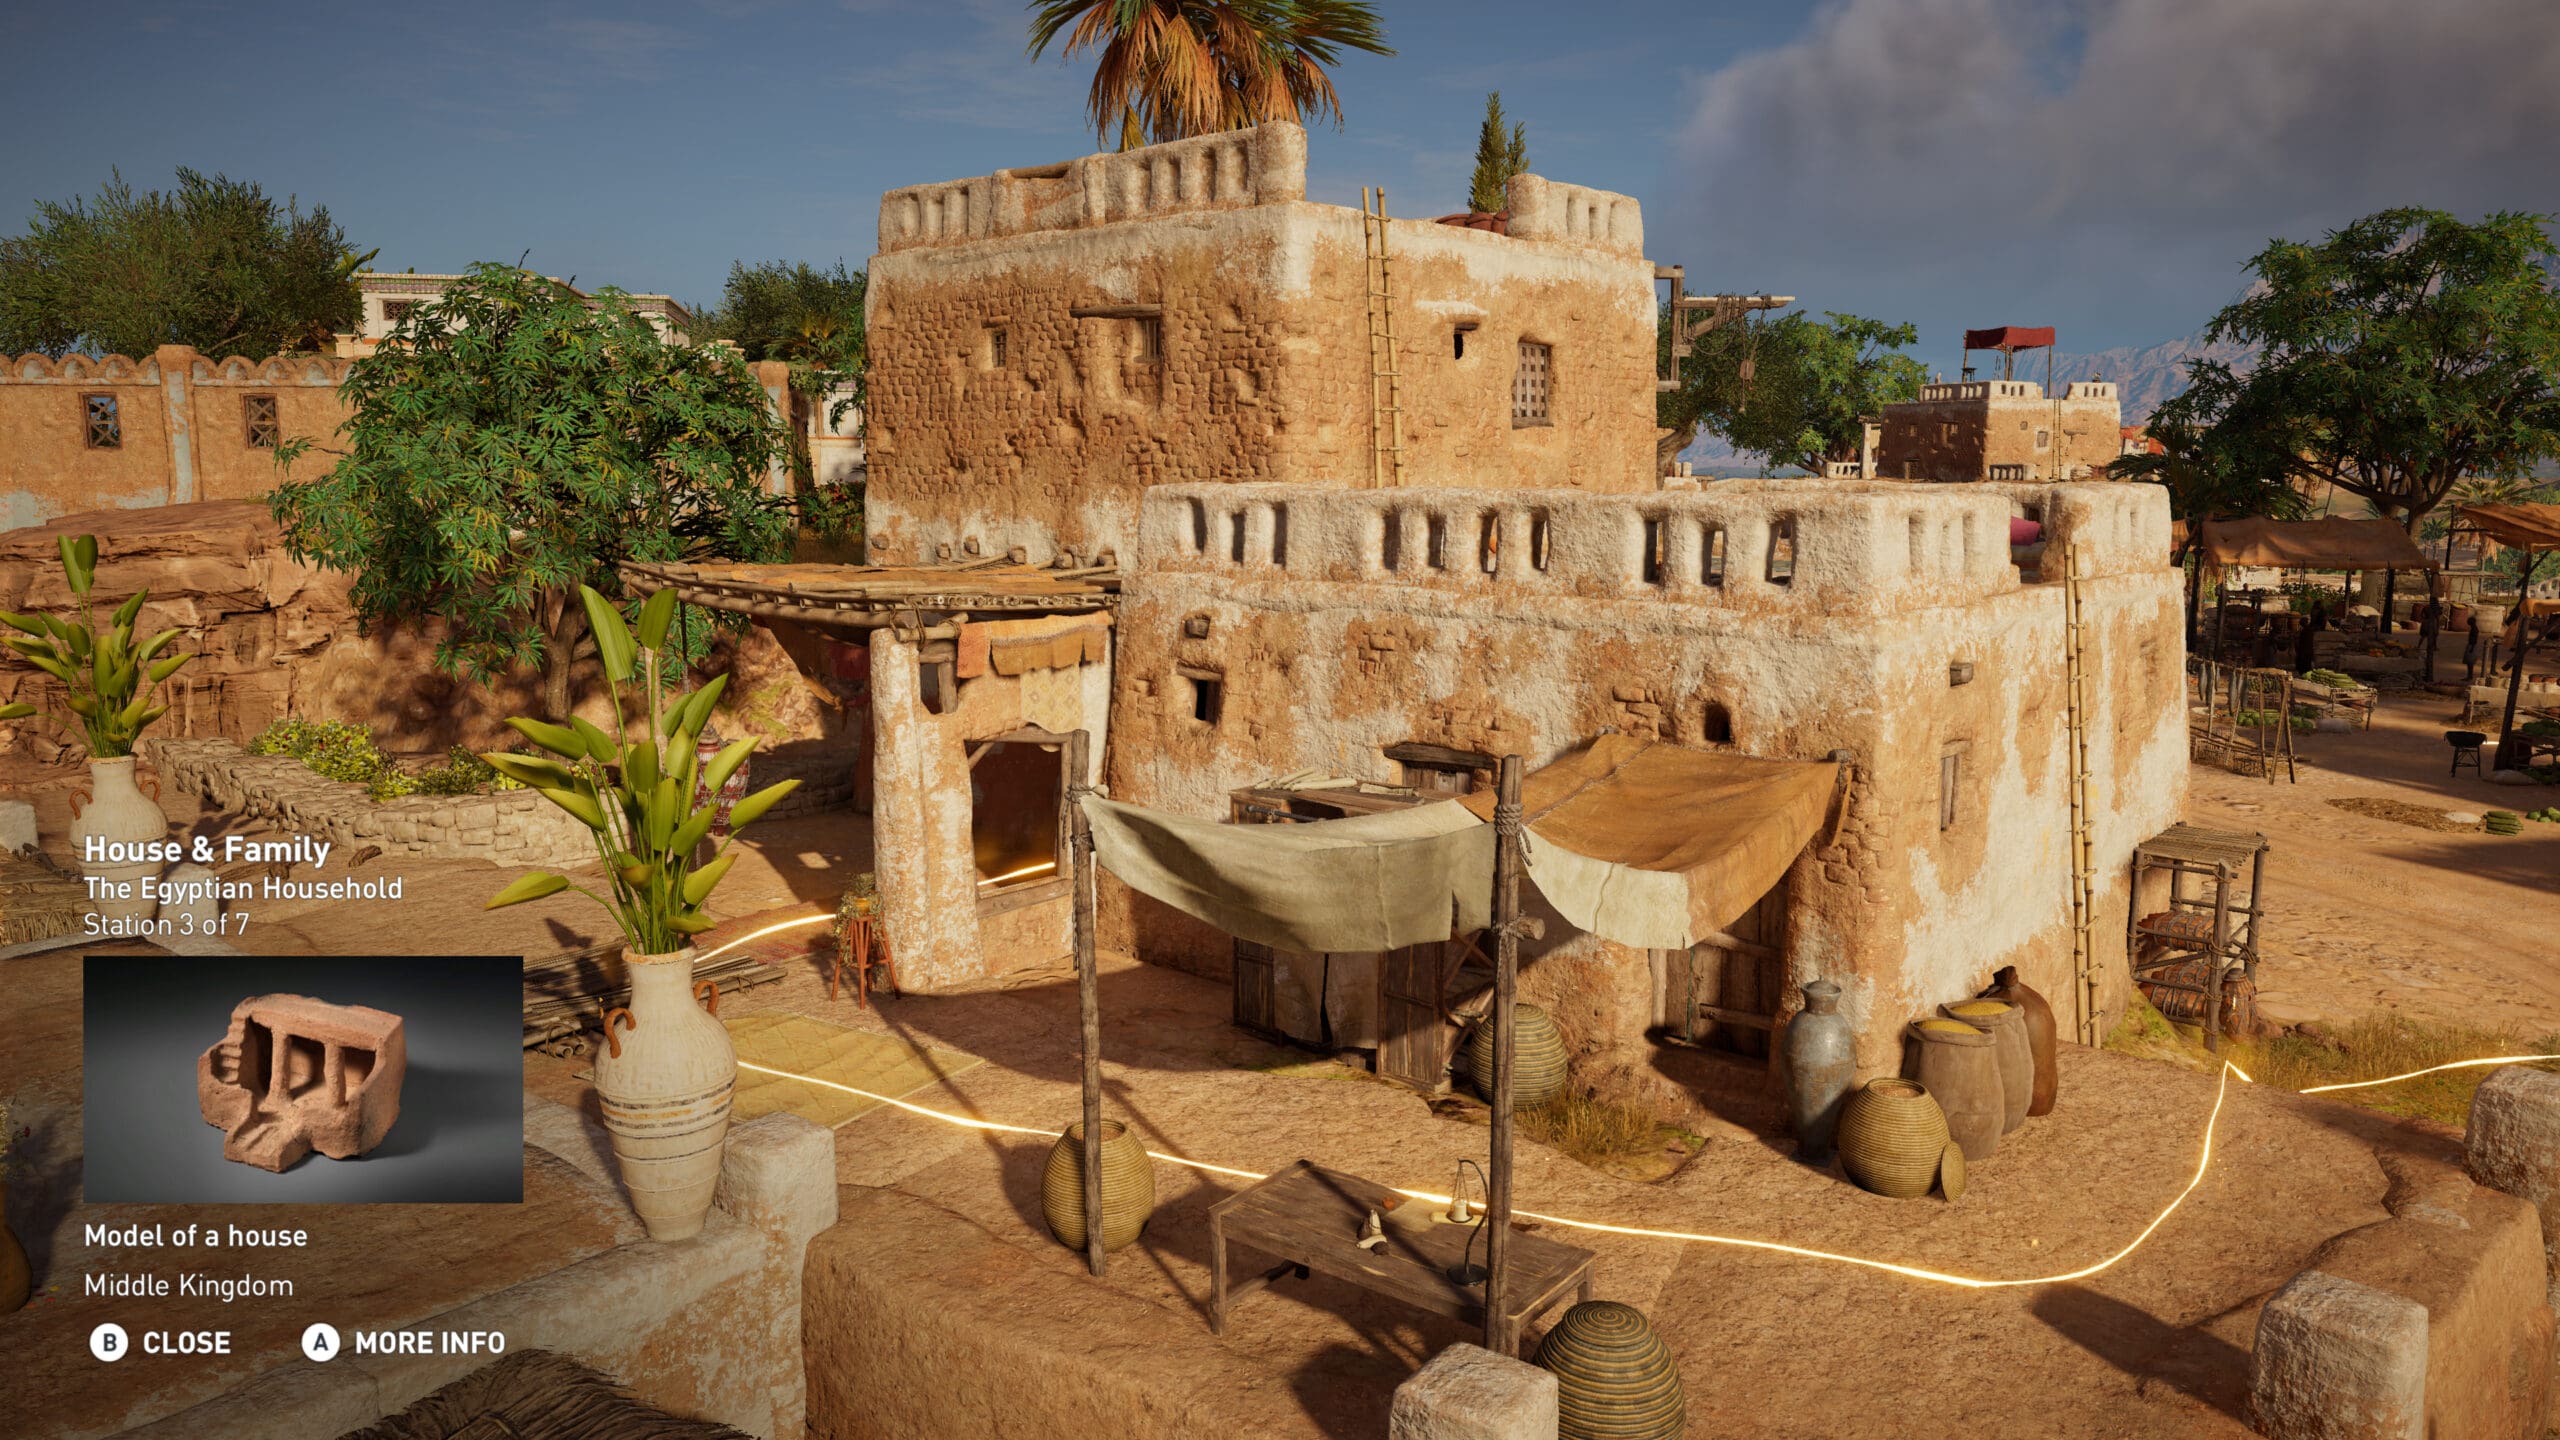 THE DISCOVERY TOUR BY ASSASSIN’S CREED TRANSFORMS ANCIENT EGYPT INTO AN INTERACTIVE MUSEUM